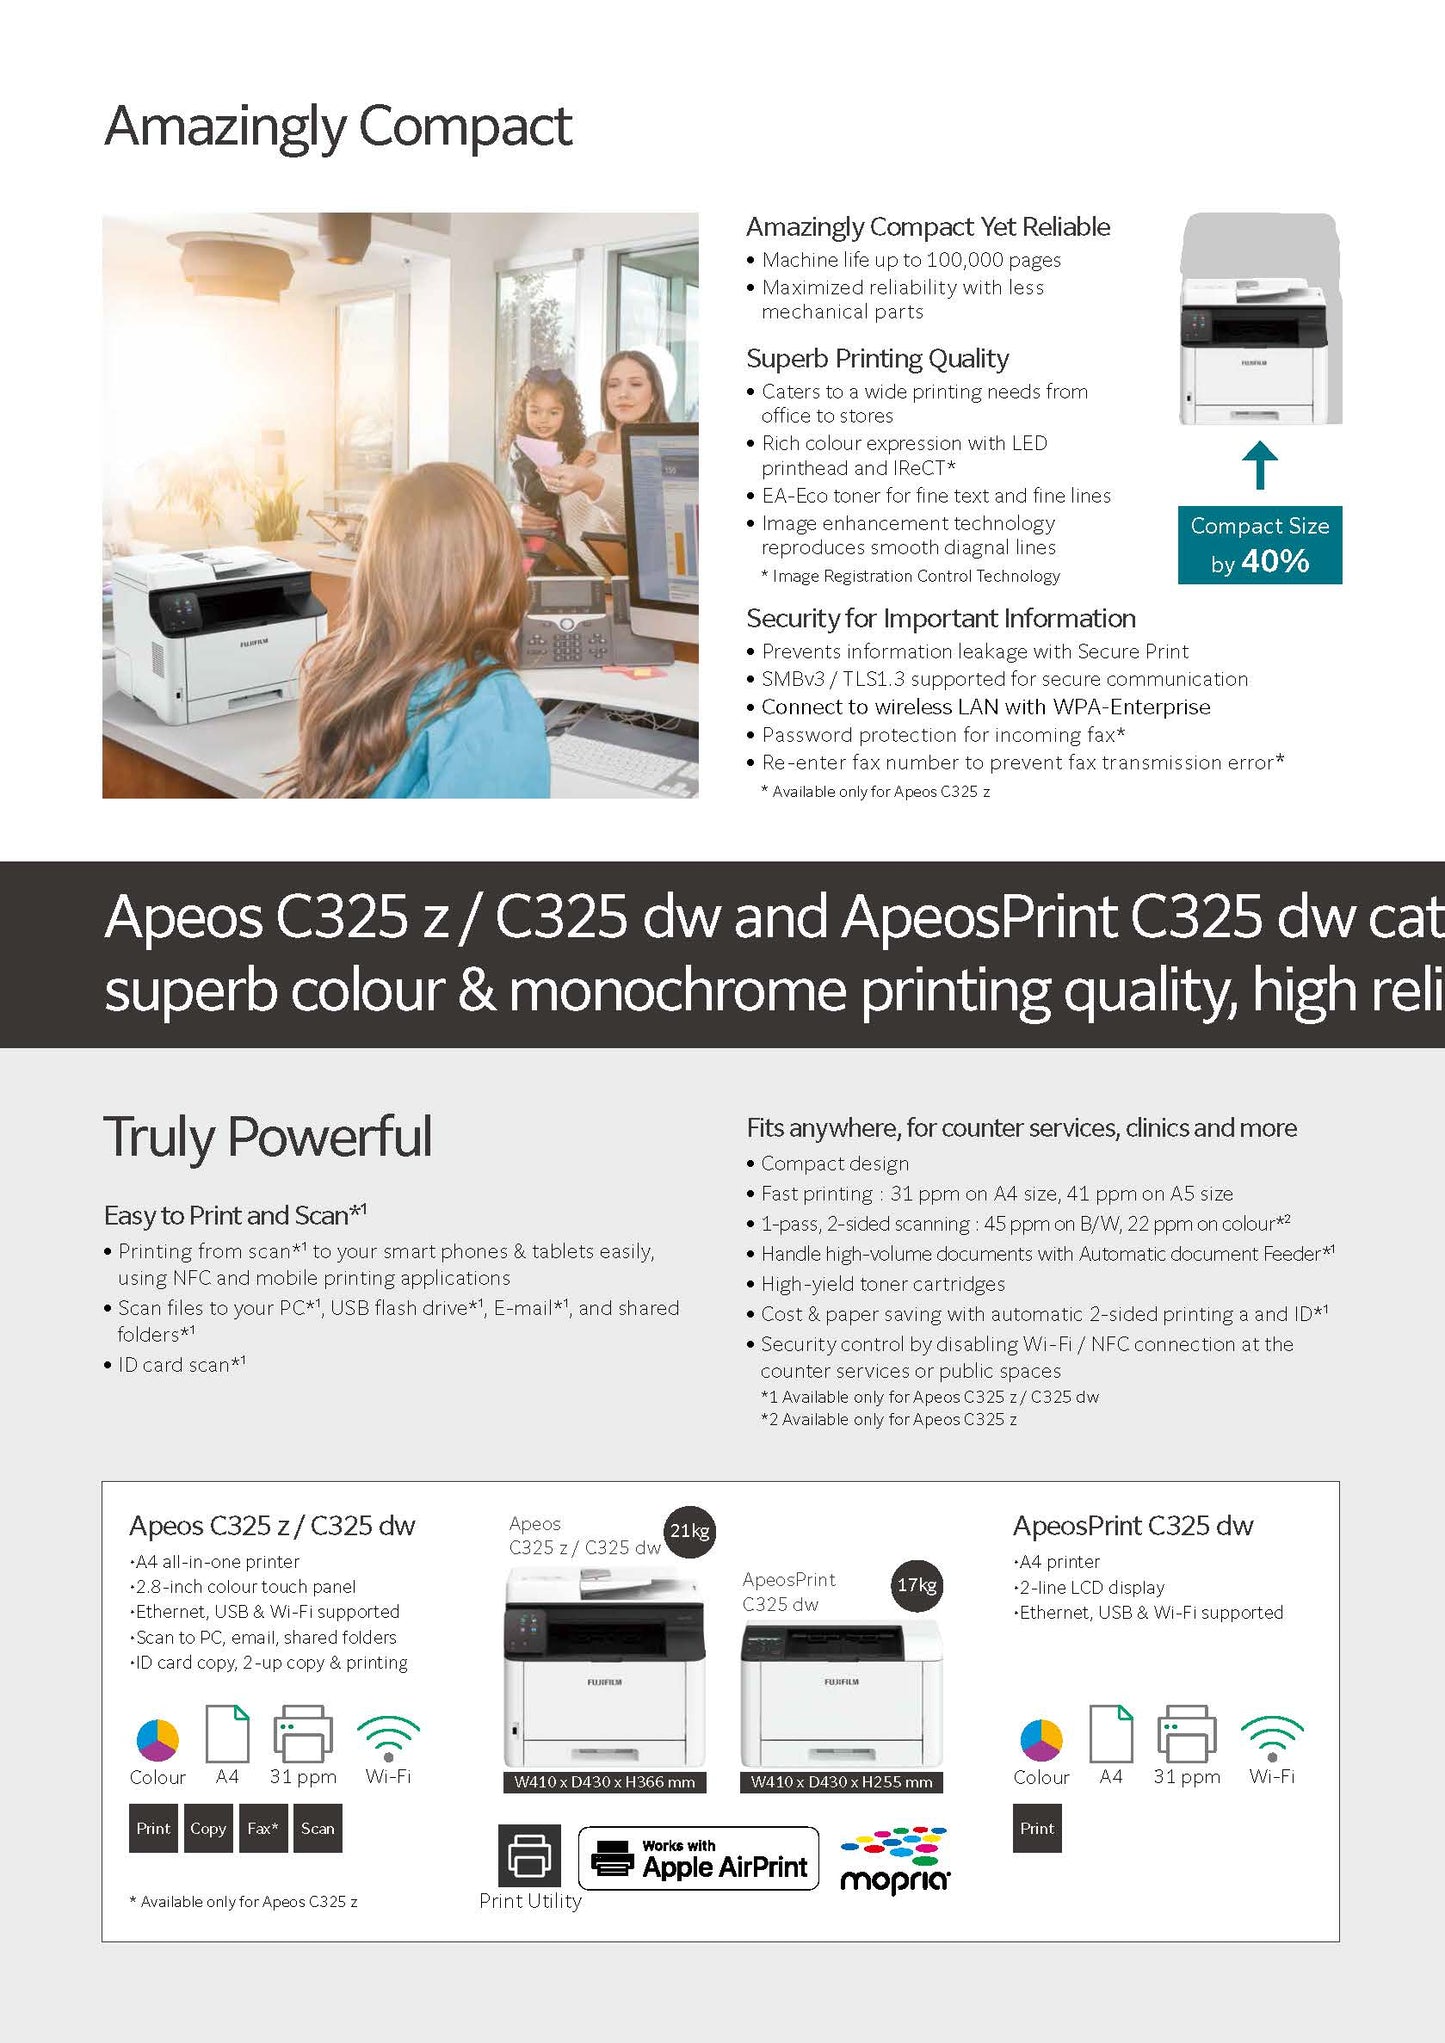 Apeos C325 dw Wireless Colour Multi-Function Printer. Print, Scan and Copy. 3 years On-Site Warranty by Fujifilm.